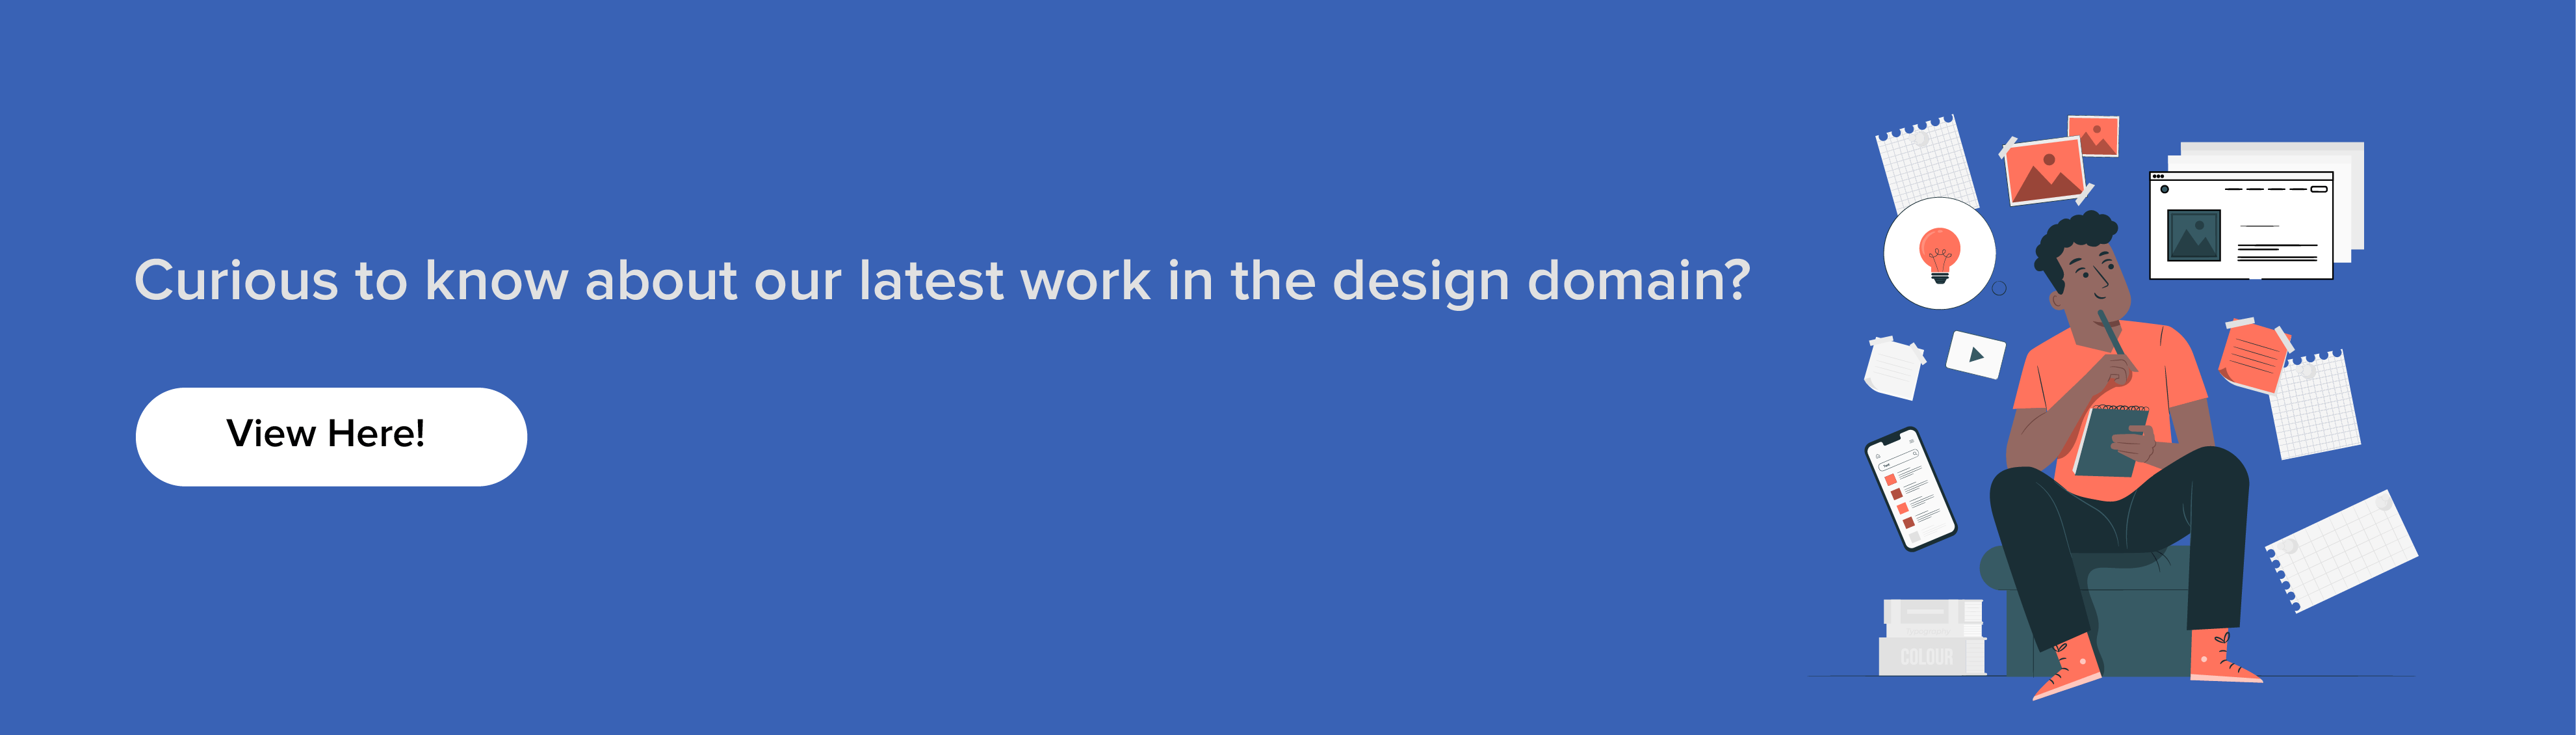 know our latest work in design domain